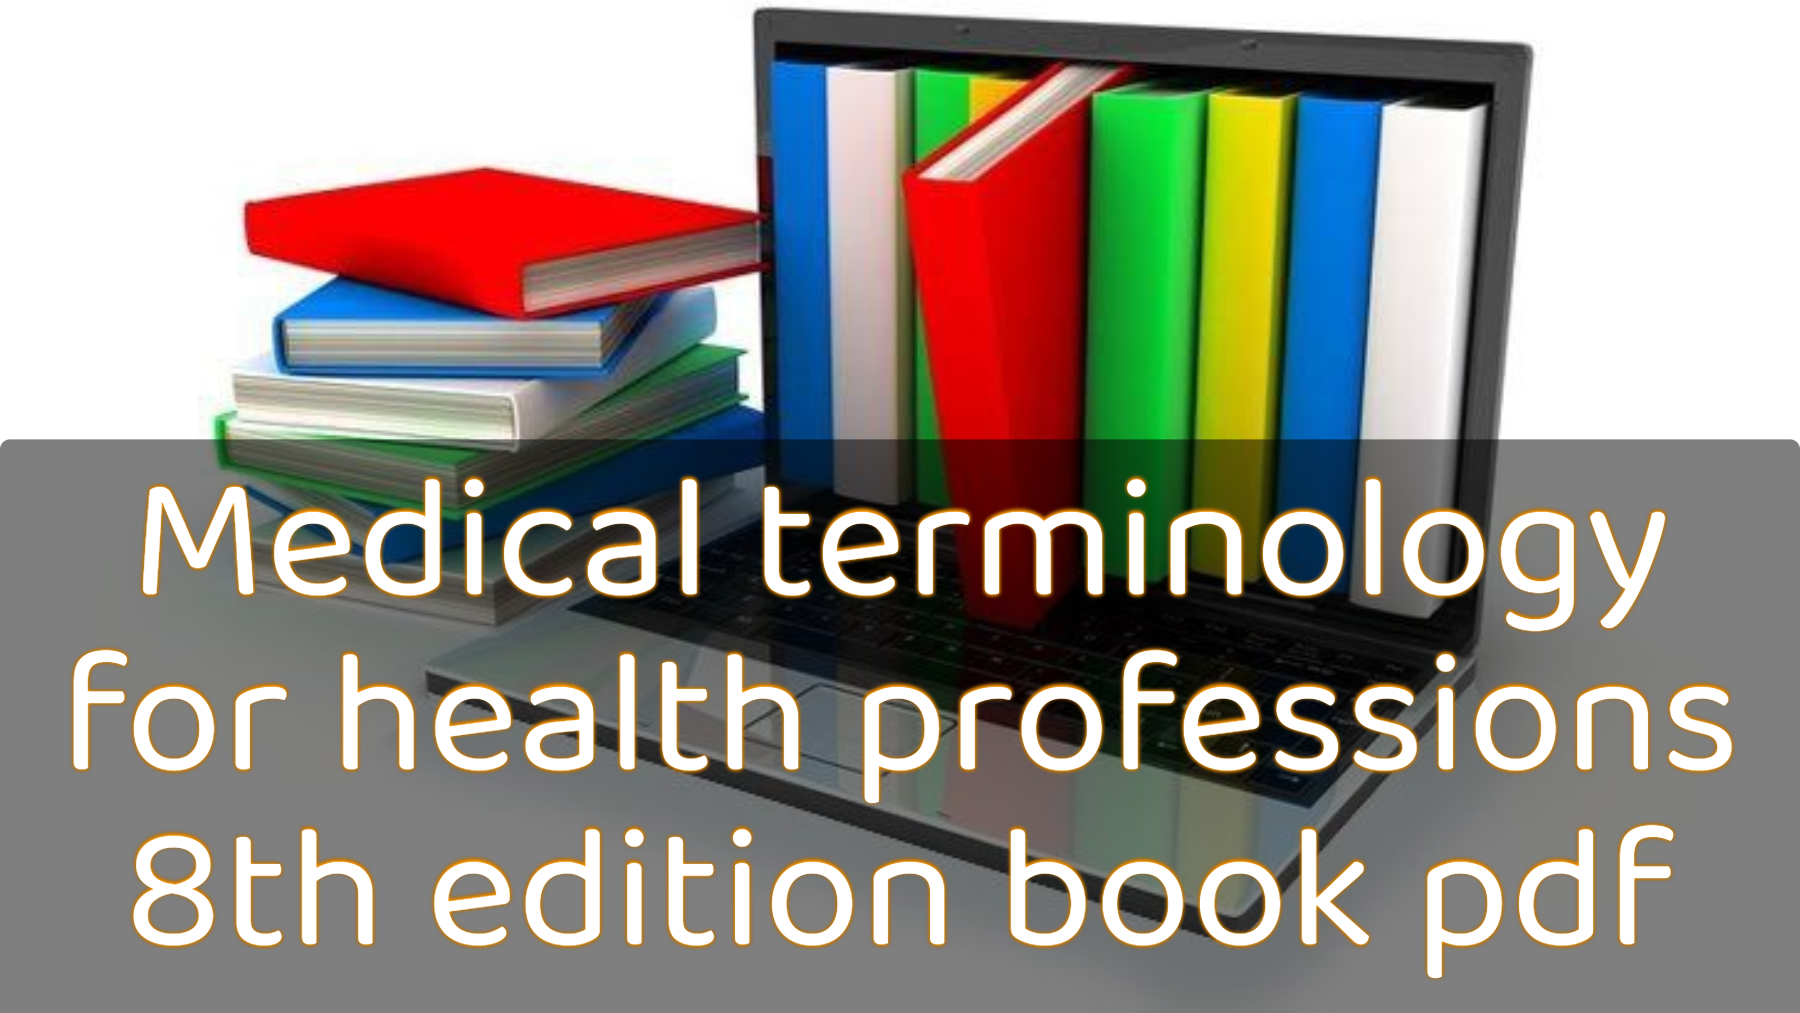 Medical terminology for health professions 8th edition book pdf, Medical terminology for health professions 8th edition, Medical terminology for health professions, Medical terminology for health professions 8th